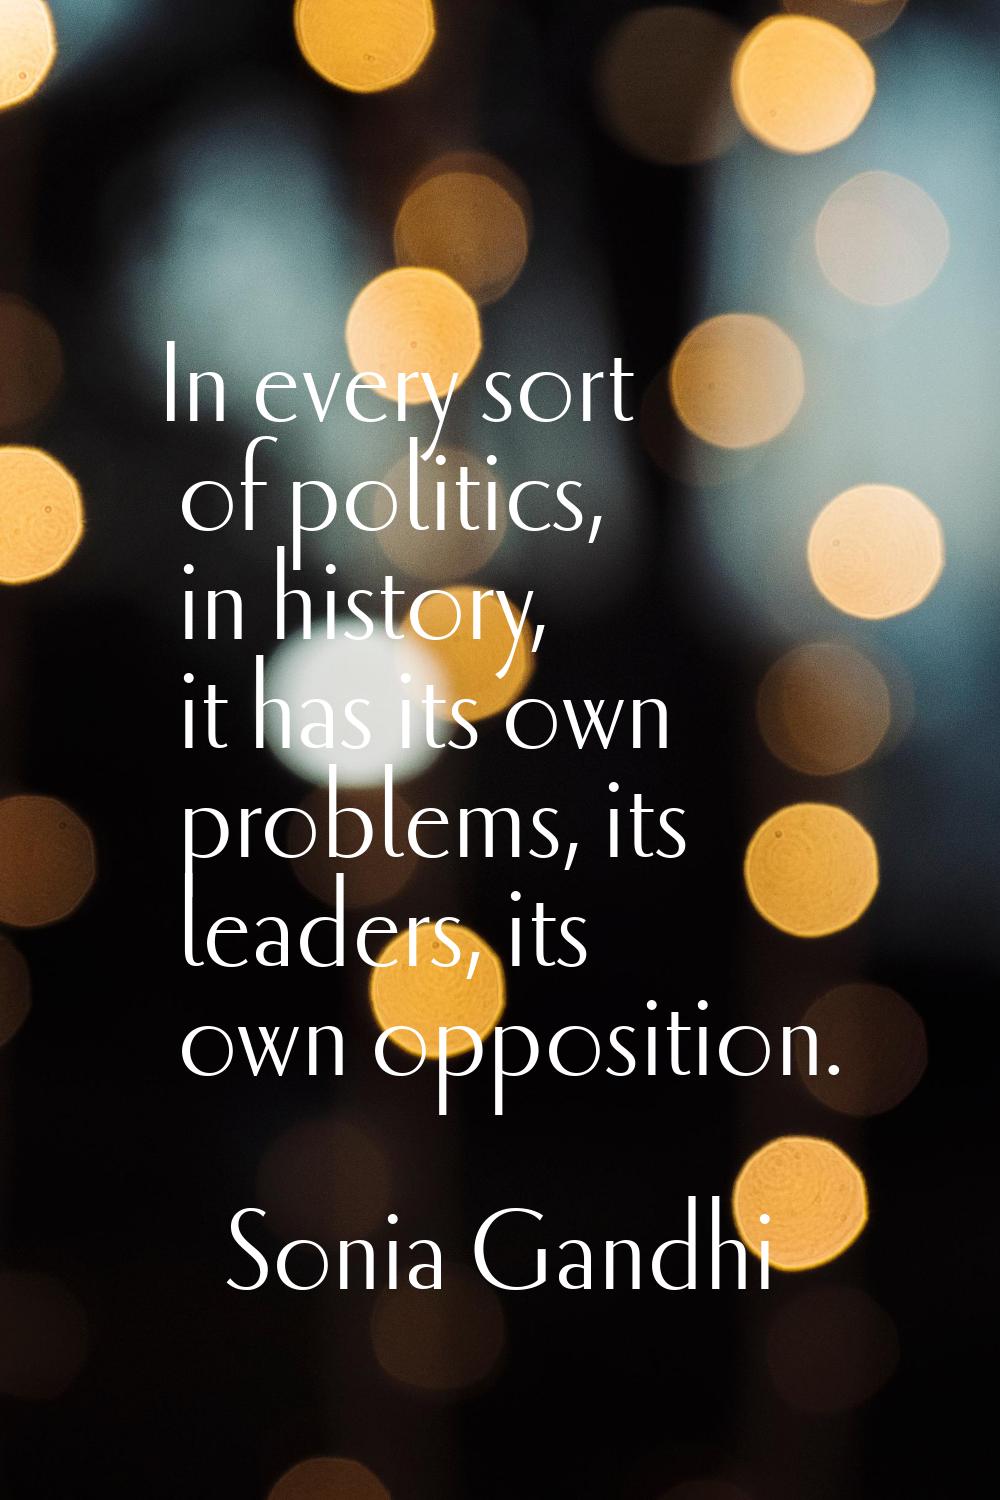 In every sort of politics, in history, it has its own problems, its leaders, its own opposition.